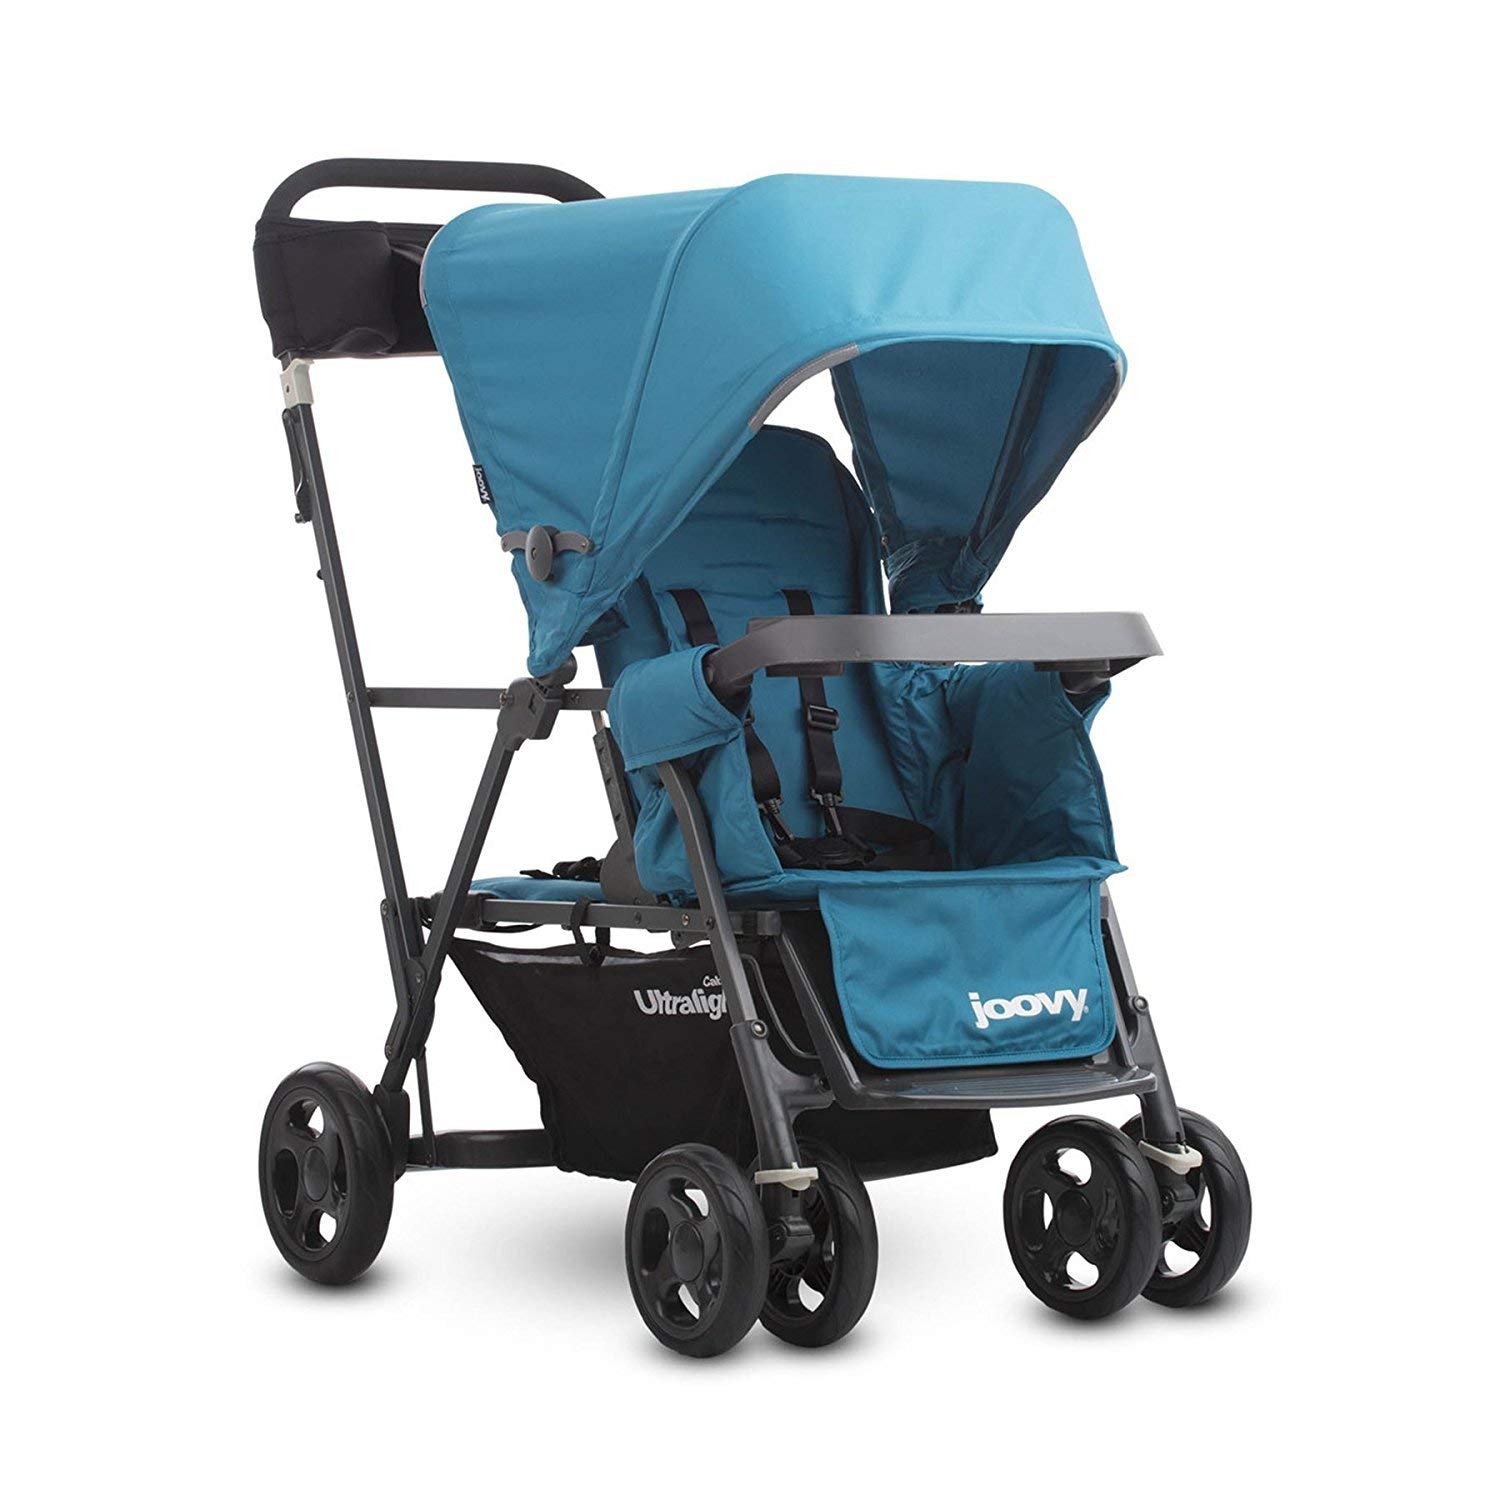 Joovy Caboose Ultralight Sit and Stand Double Stroller with Rear Bench and Standing Platform, 3-Way Reclining Seats, Optional Rear Seat, and Universal Car Seat Adapter (Turq)
